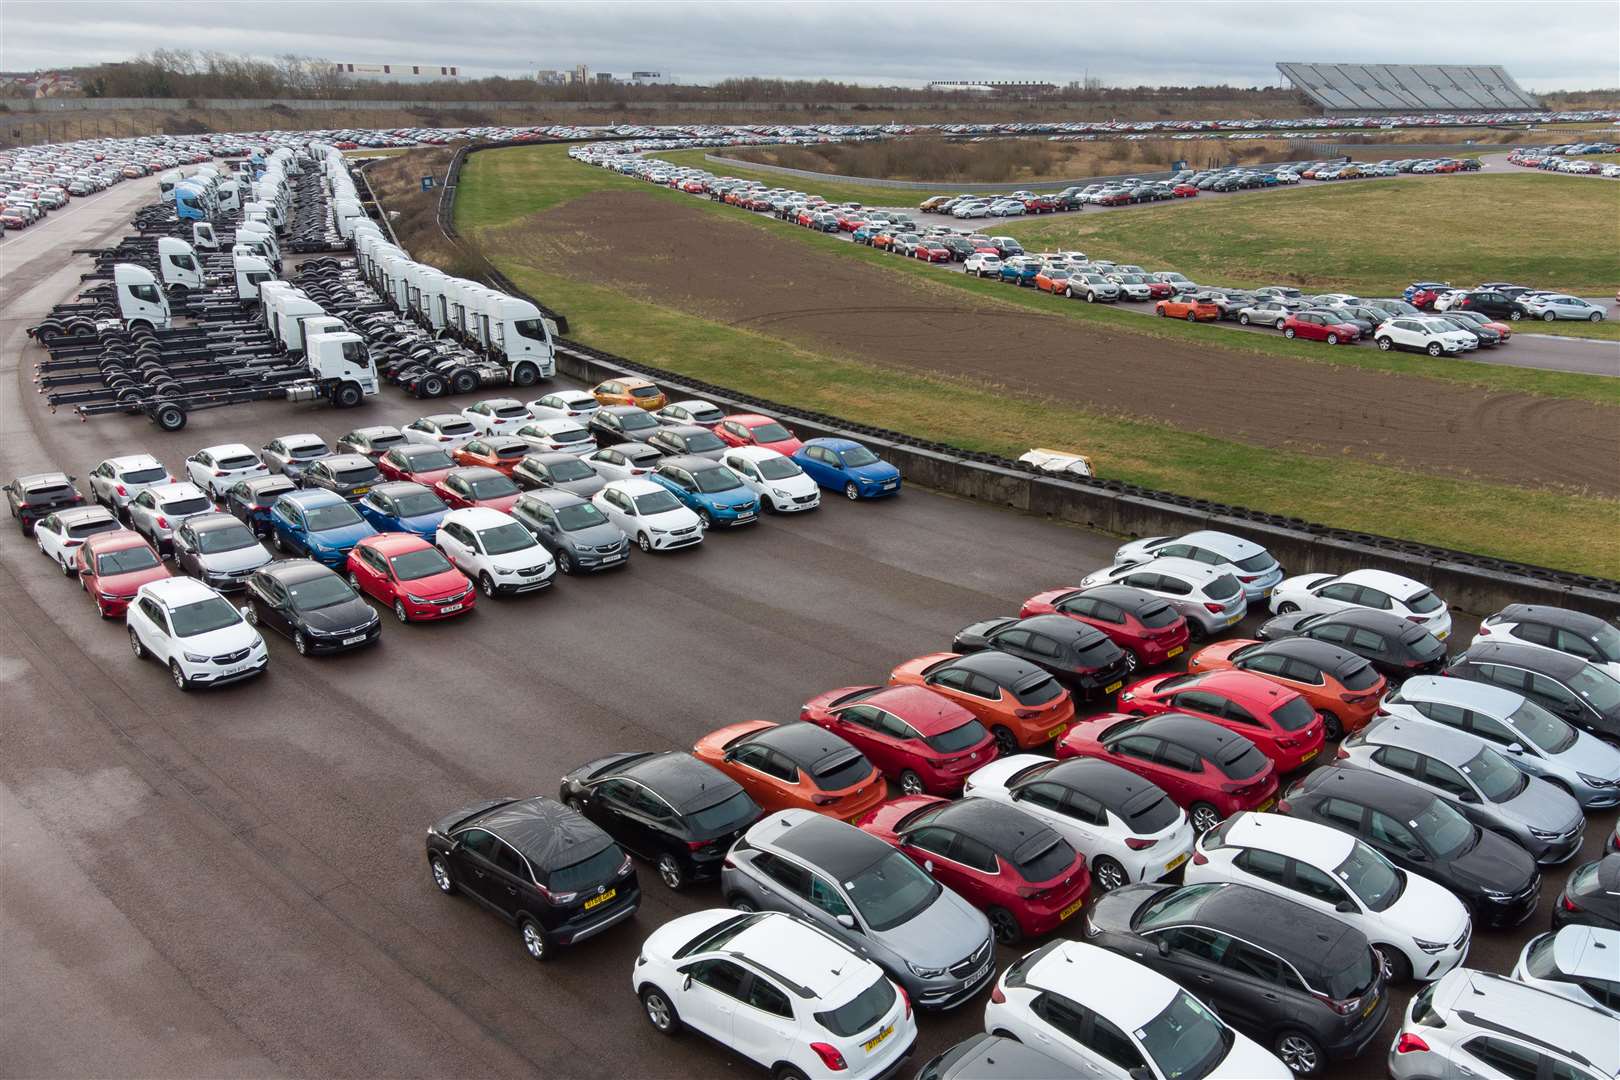 Vehicles including trucks and HGV cabs are also stored on the site near Corby in Northamptonshire (Joe Giddens/PA)